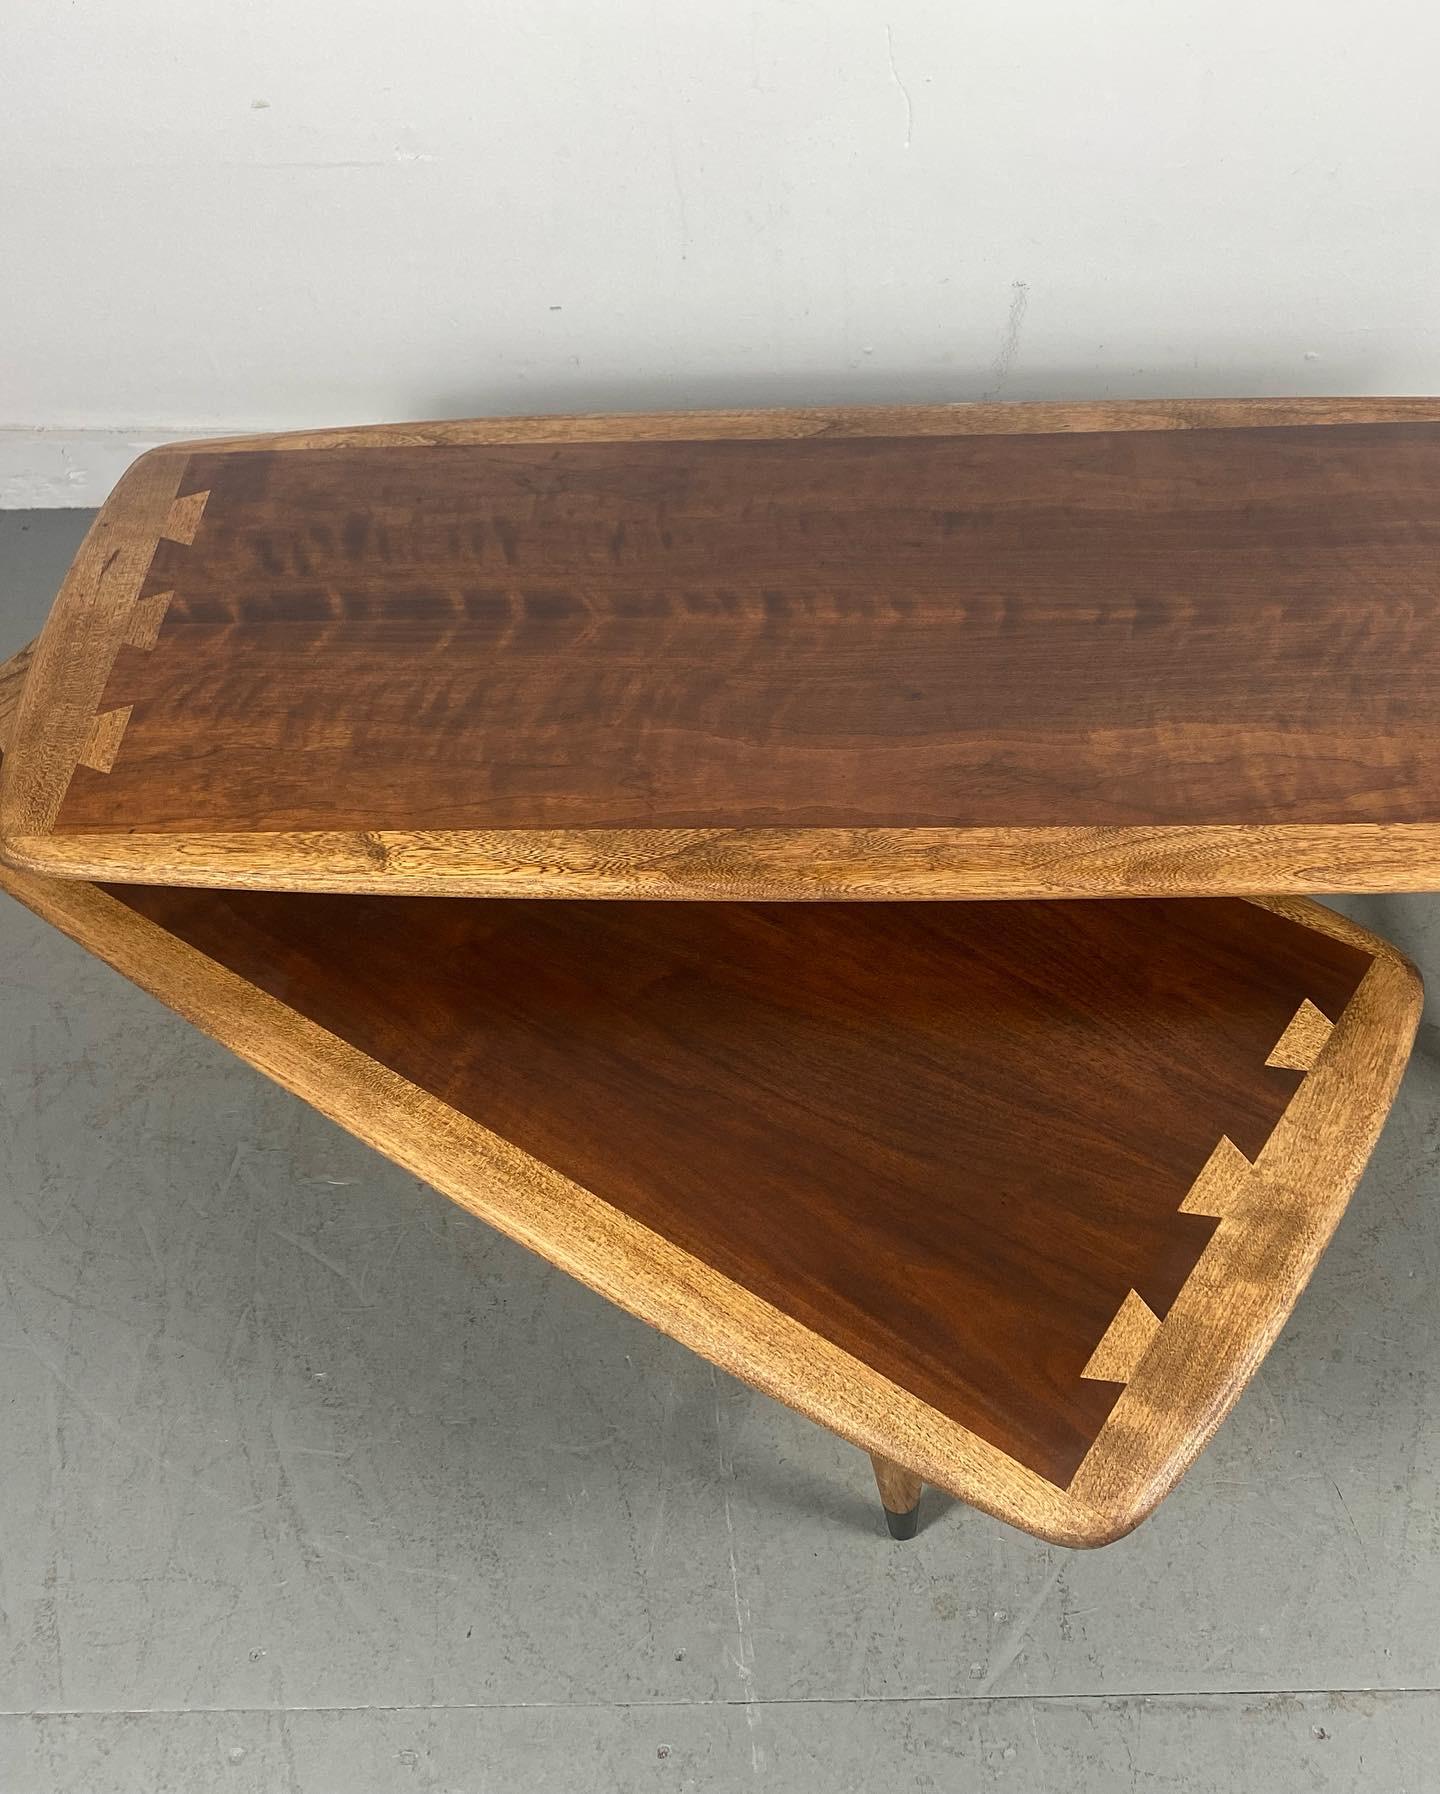 Seldom seen LANE 'switch-blade coffee / cocktail table..classic mid century modern,, Ingenious design,, can be used in several different configurations..straight,, straight tiered, or L-Shape,,, Stunning two-tone wood grain,, dove-tail joinery.